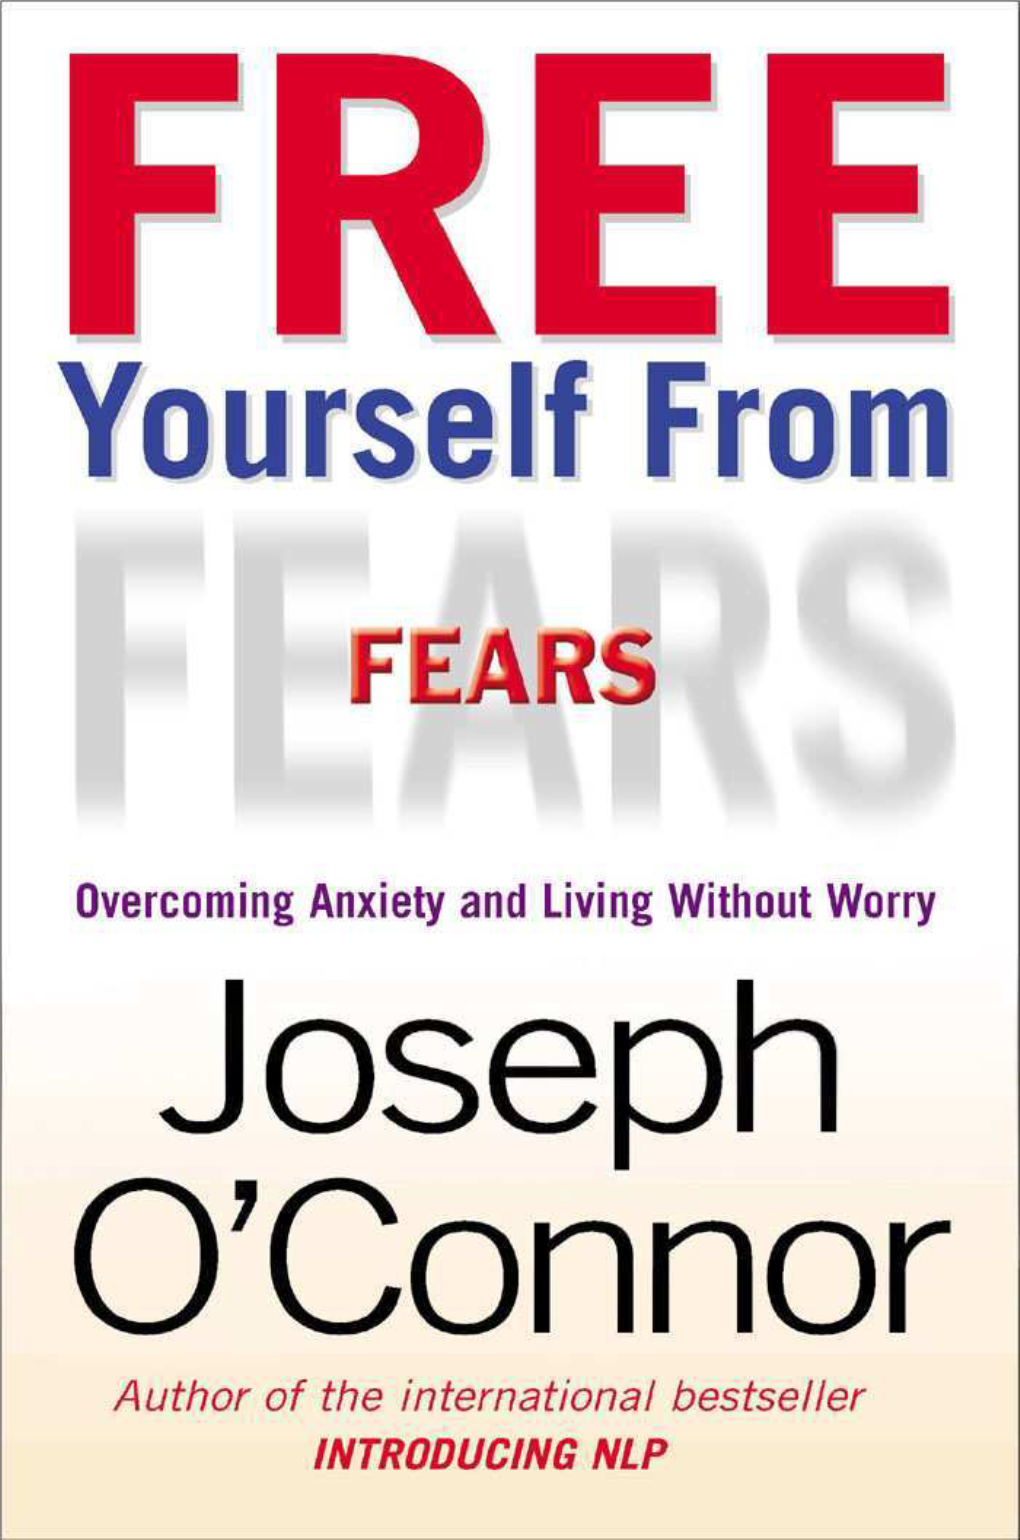 Free Yourself from Fears with NLP: Overcoming Anxiety and Living Without Worry